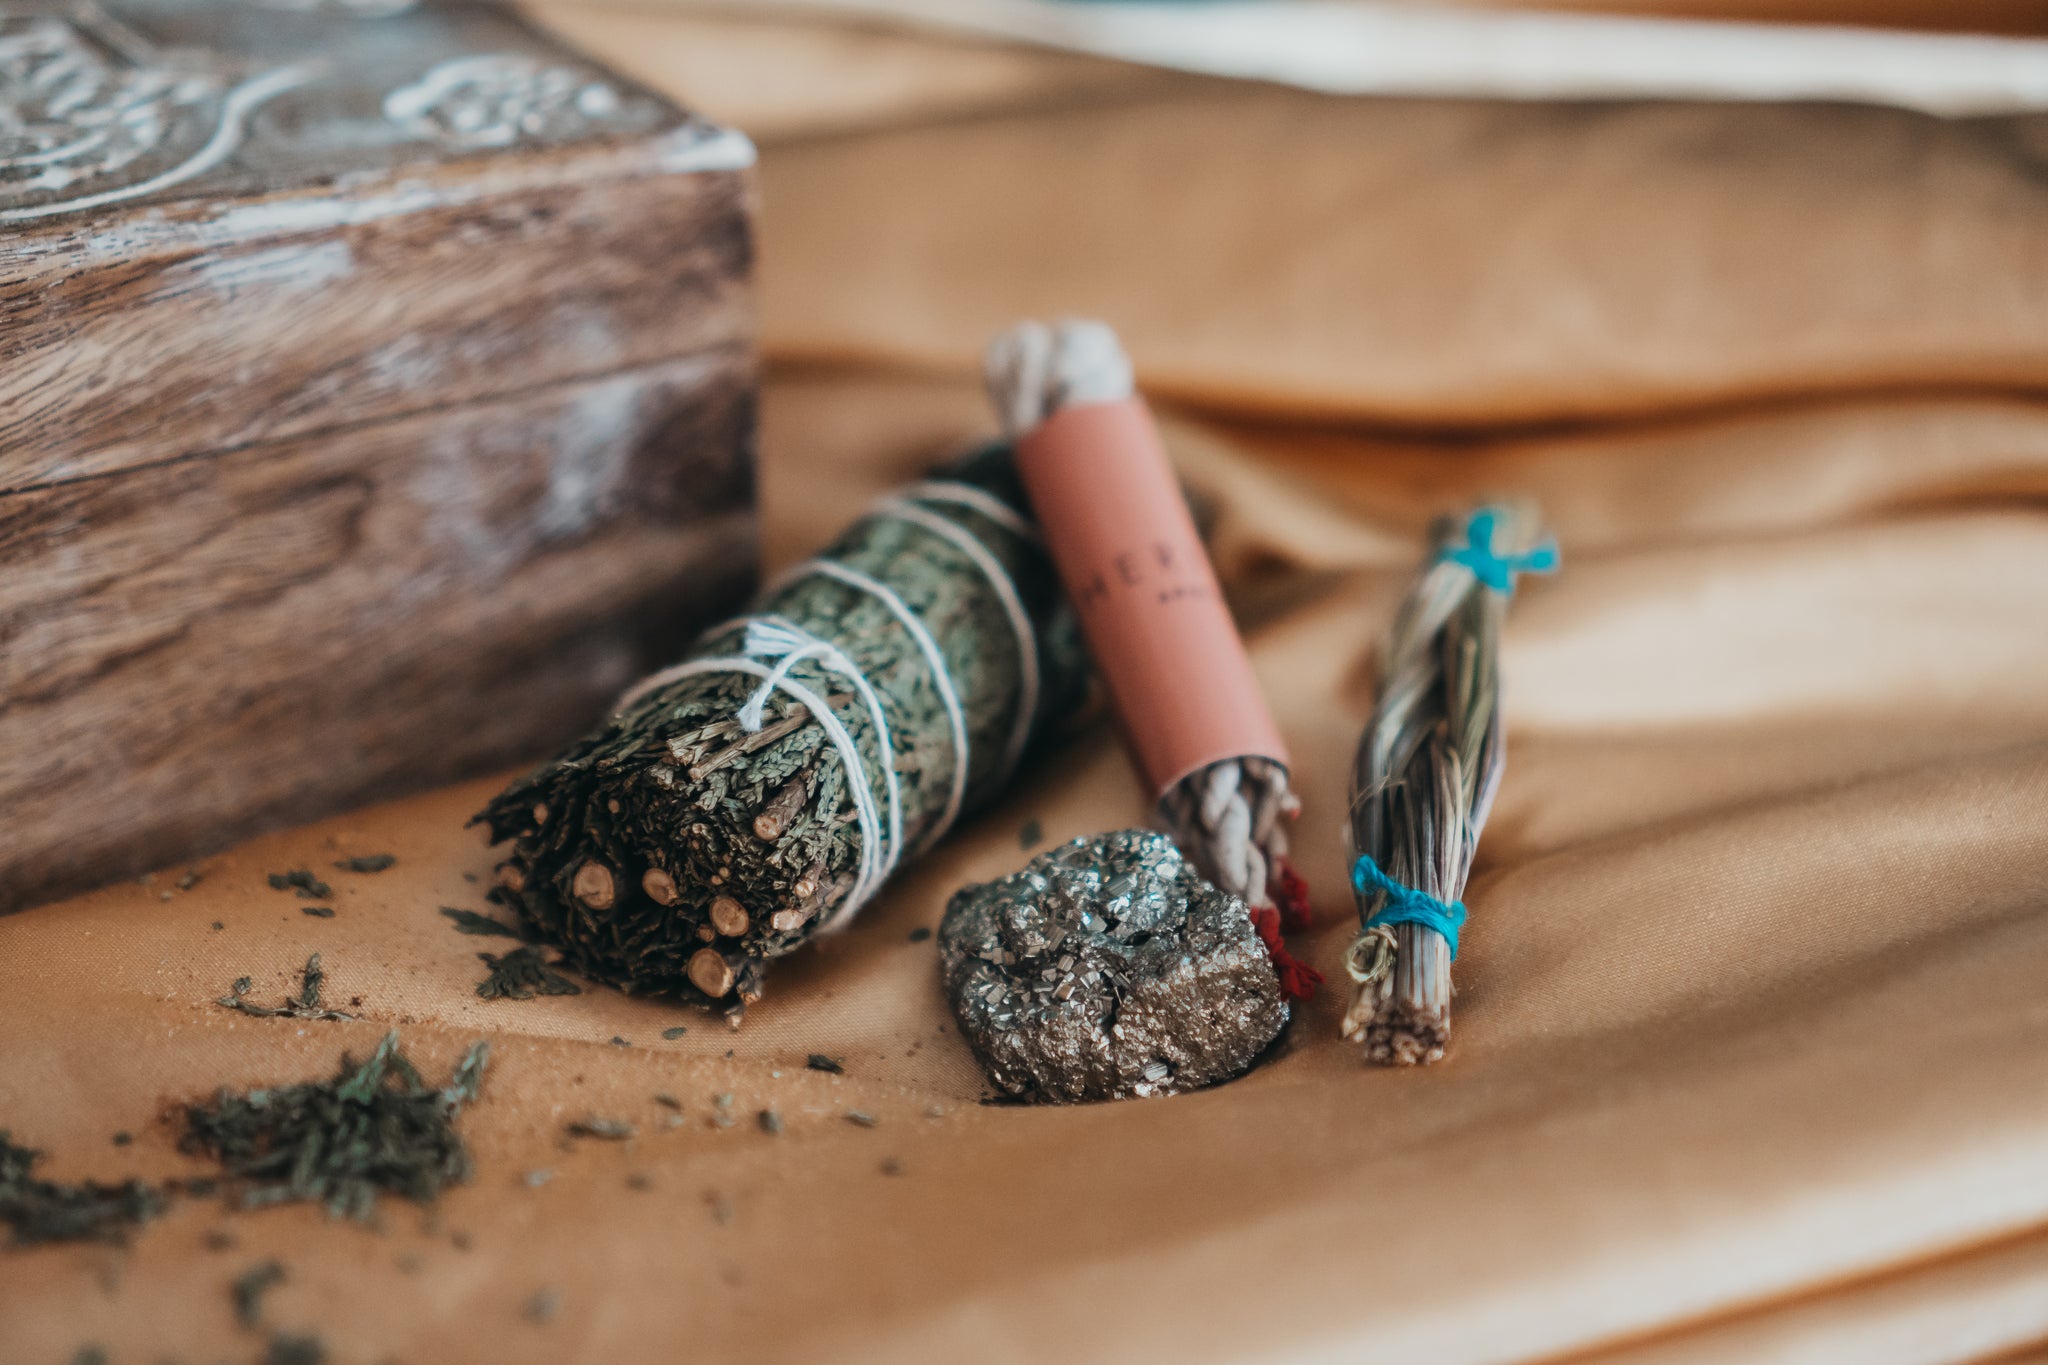 Elevate Your Spiritual Well-Being - Sacred Cedar, Sweet Grass, Pyrite, and Zimbu Rope Incense in a Beautiful Hand Carved Keepsake Wooden Box. Experience Protection and Blessings!